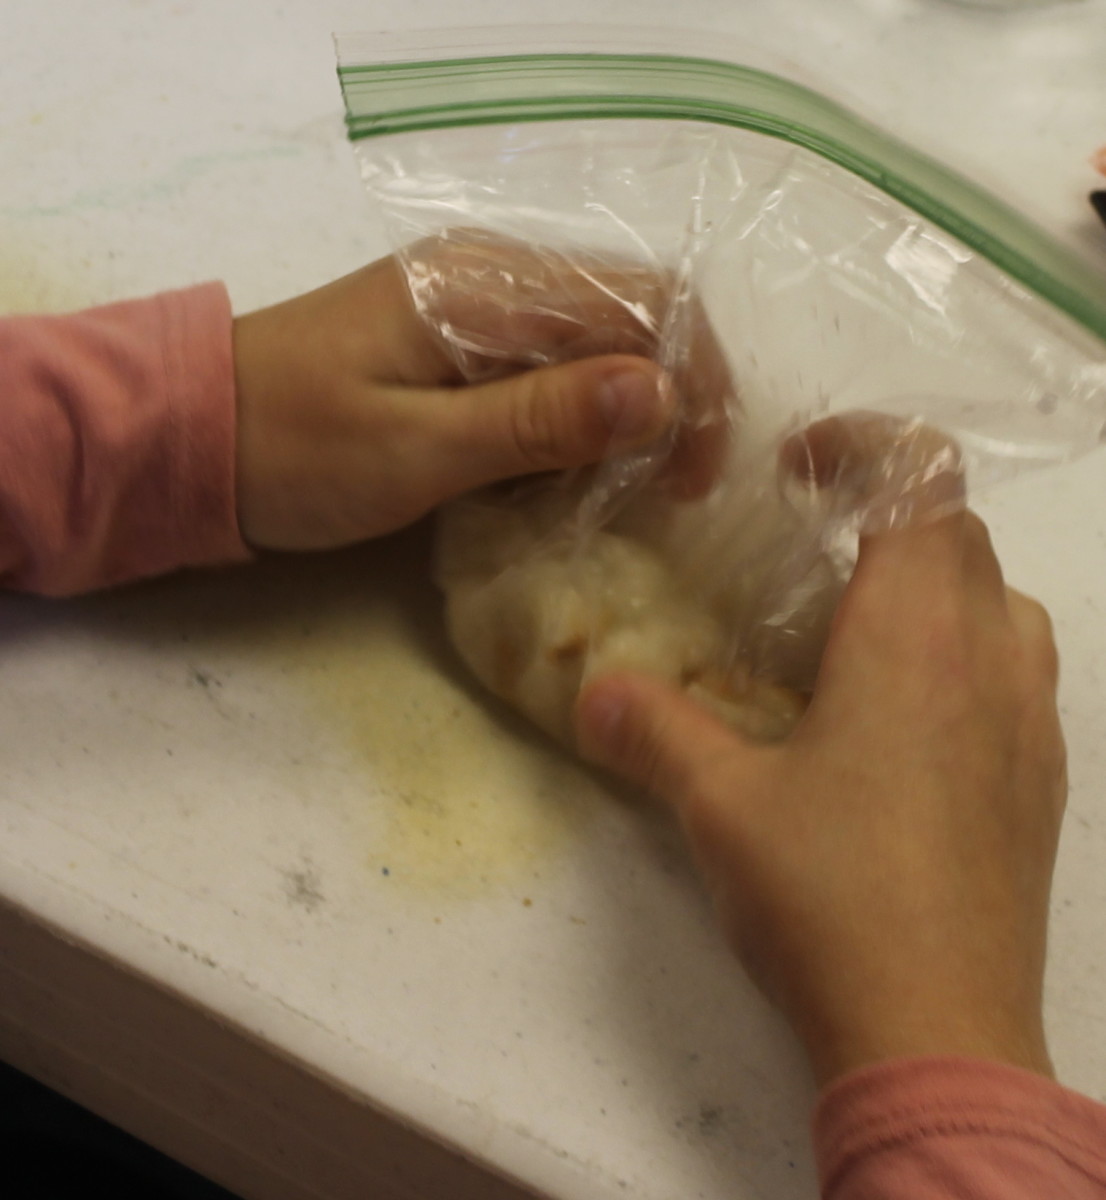 "Chyme" in the stomach made using vinegar and crackers and a sandwich bag